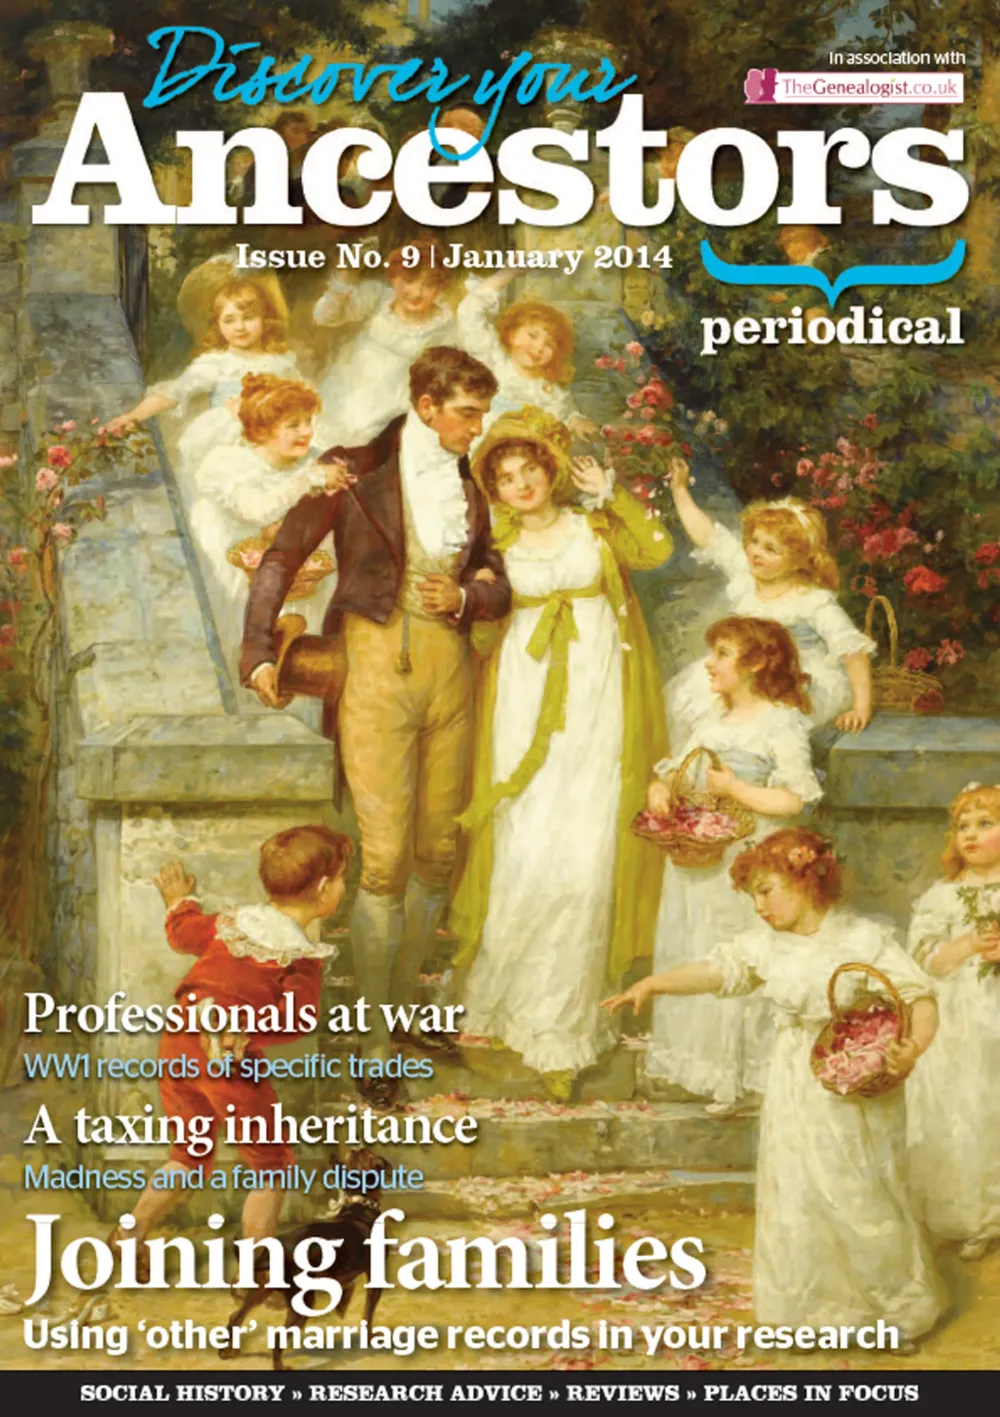 Discover Your Ancestors Periodical - January 2014